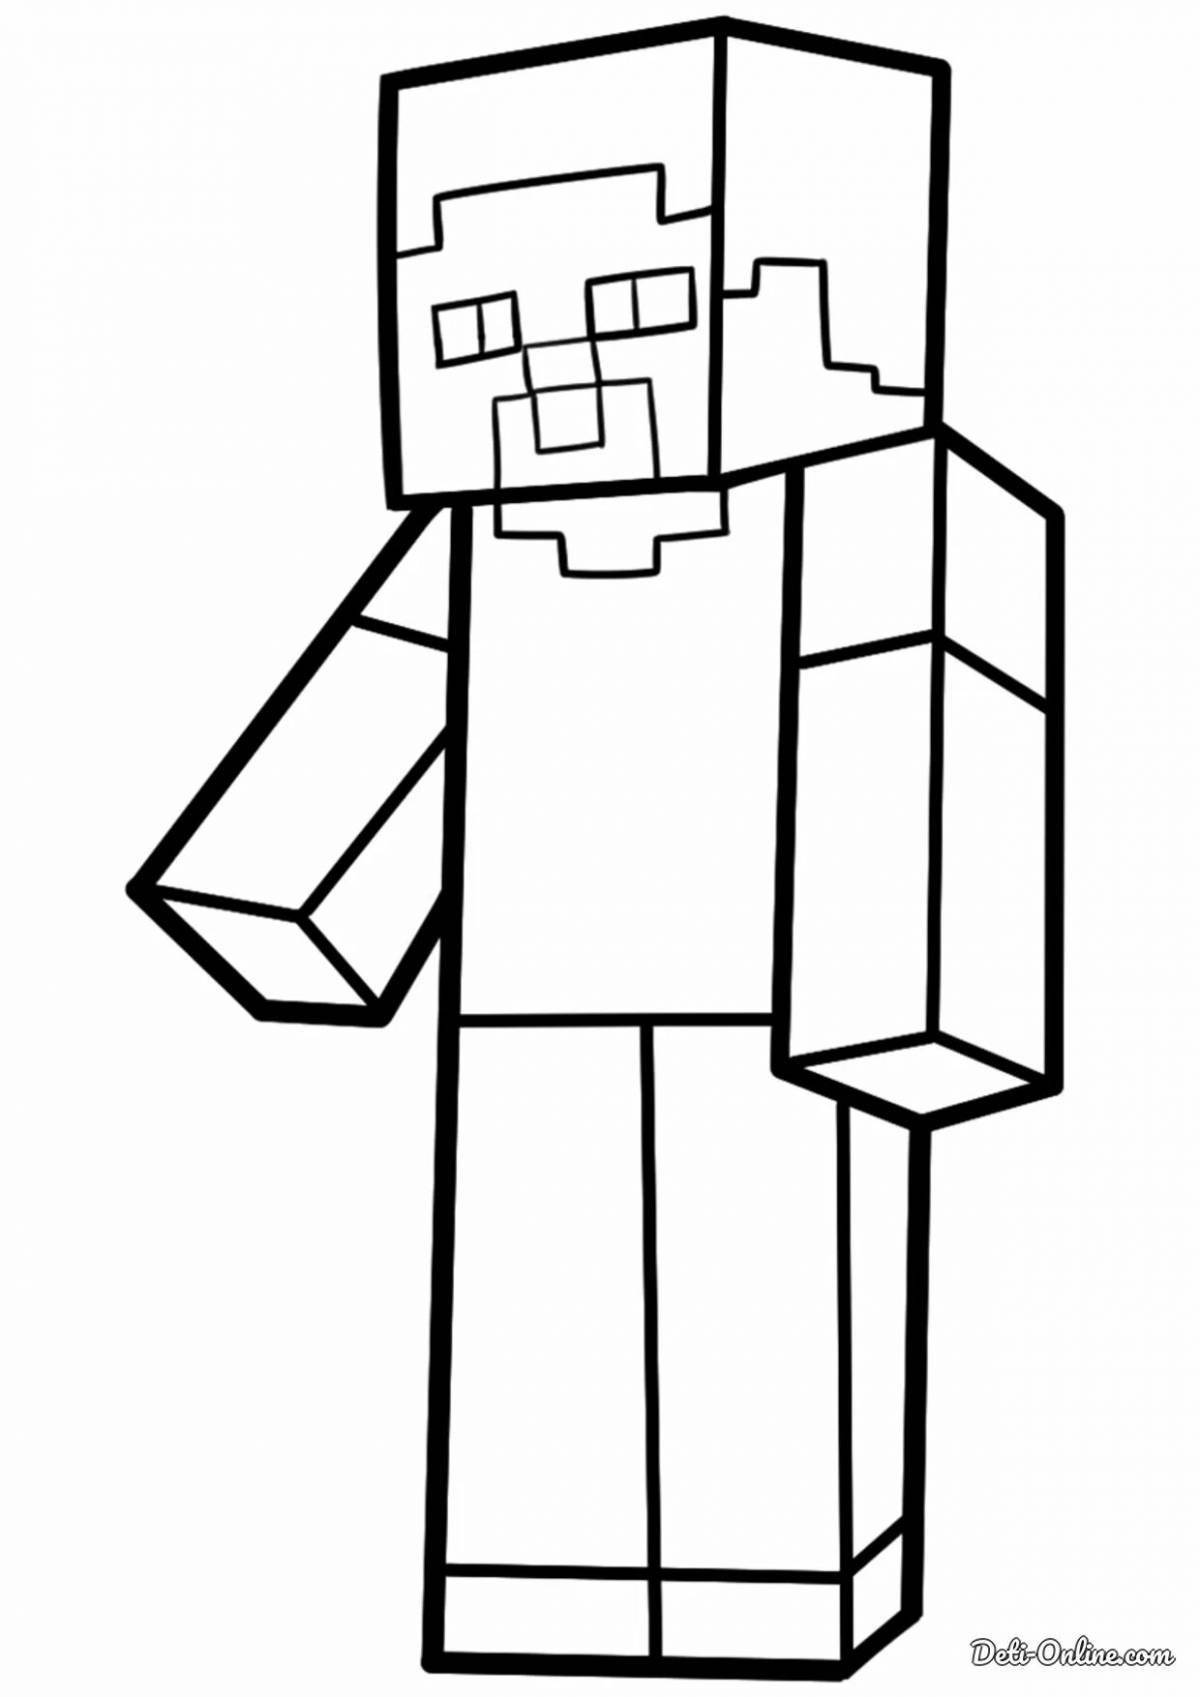 Colorful minecraft player coloring page